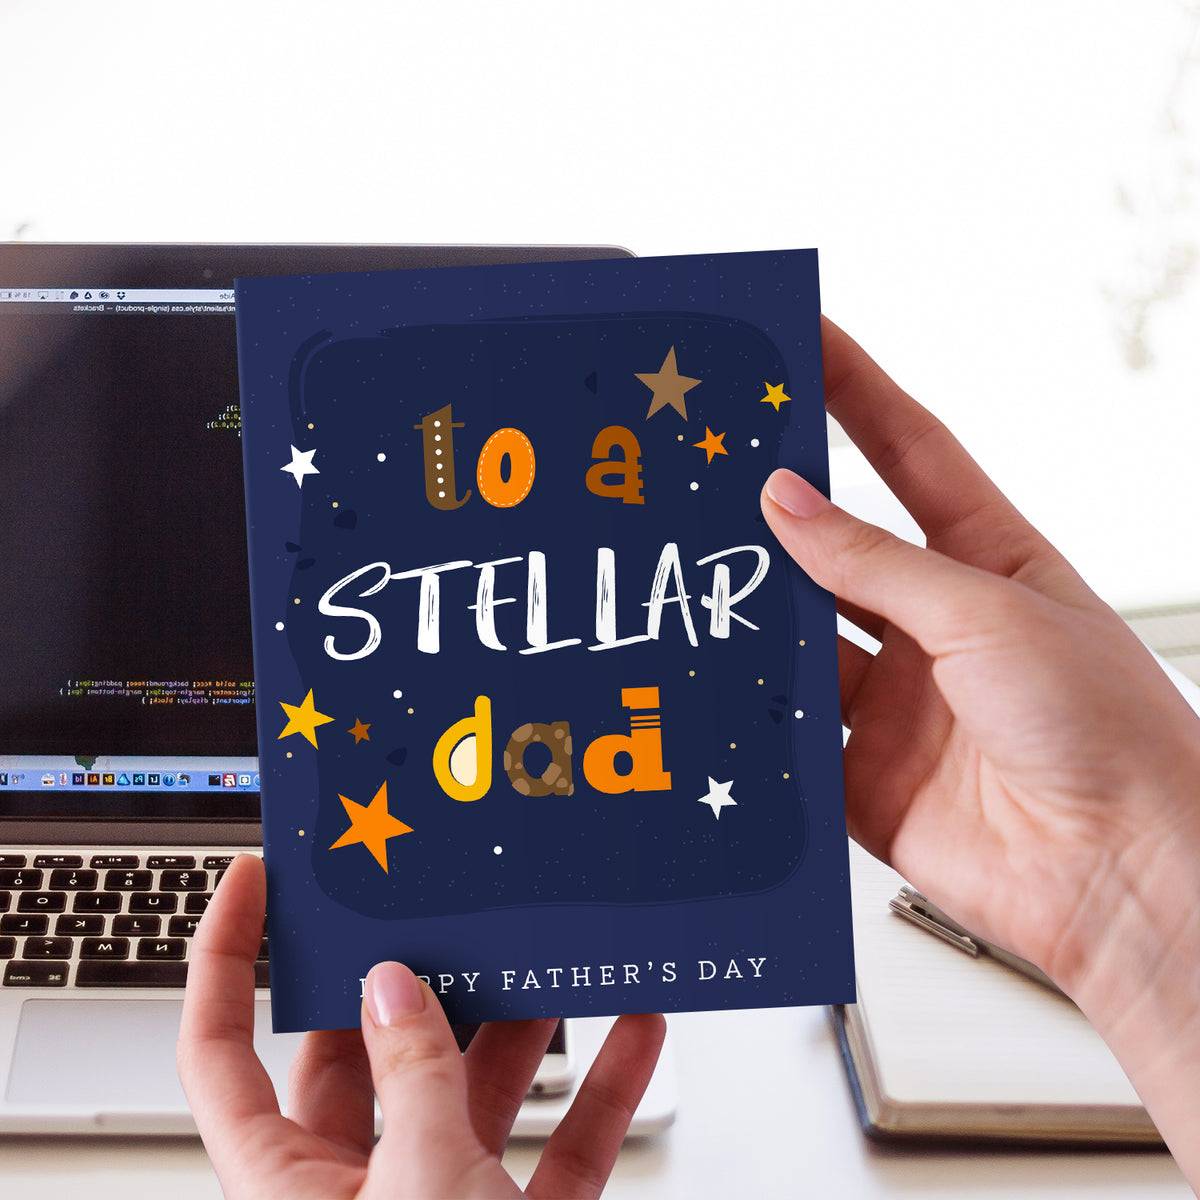 To A Stellar Dad, Happy Father's Day Greeting Cards and Envelopes for Dad, Stepdad | 4.25 x 5.5 | 10 per Pack